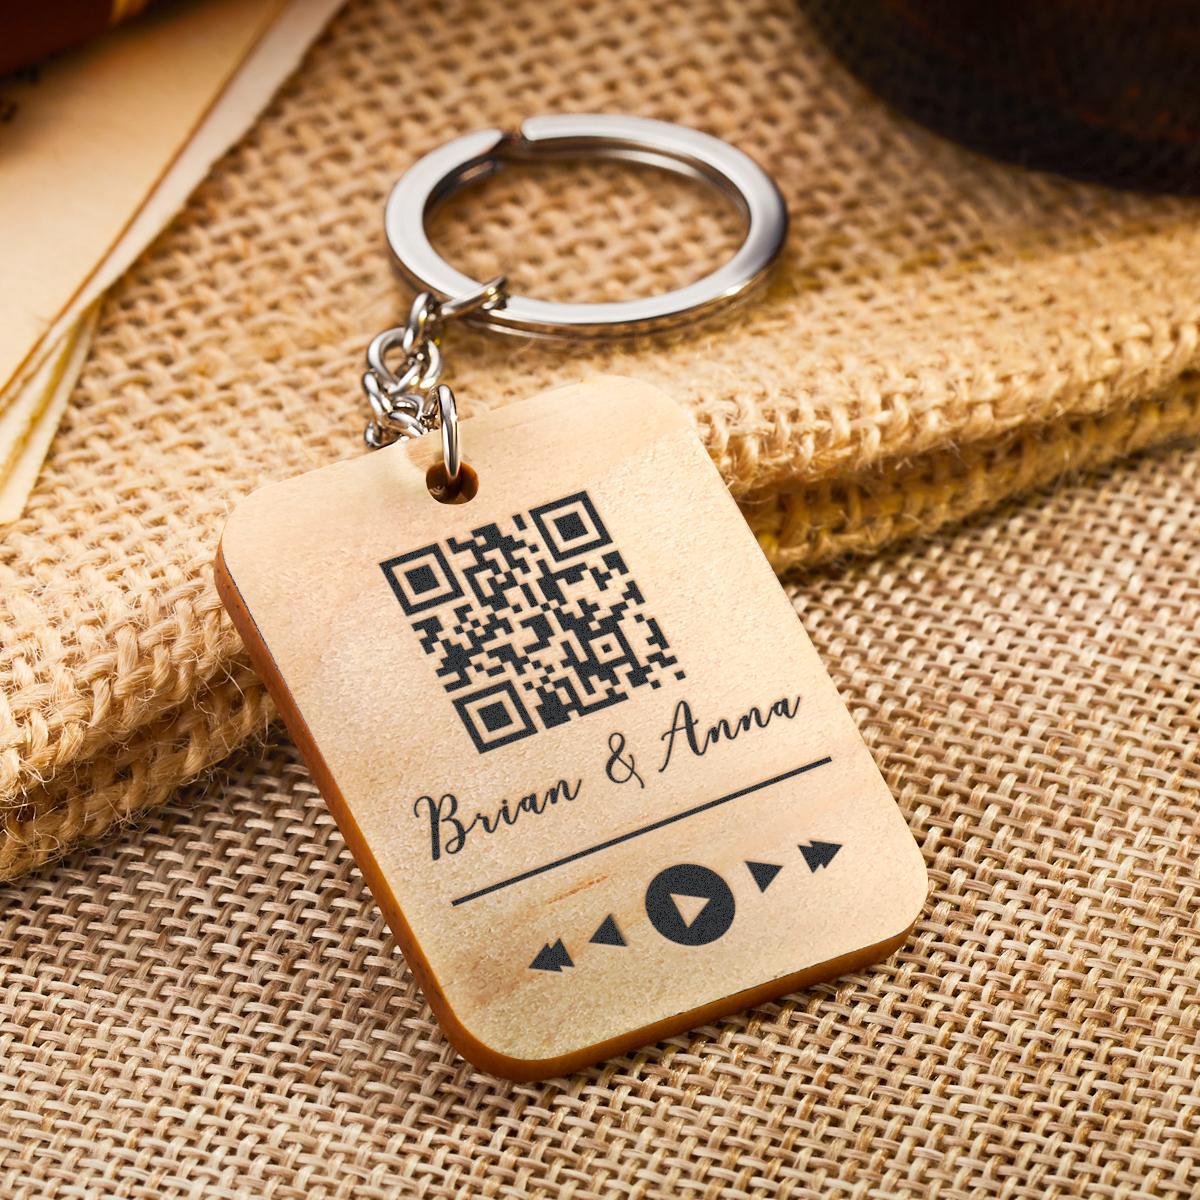 Custom Wooden QR Code Key Chain With Your Text - soufeelus